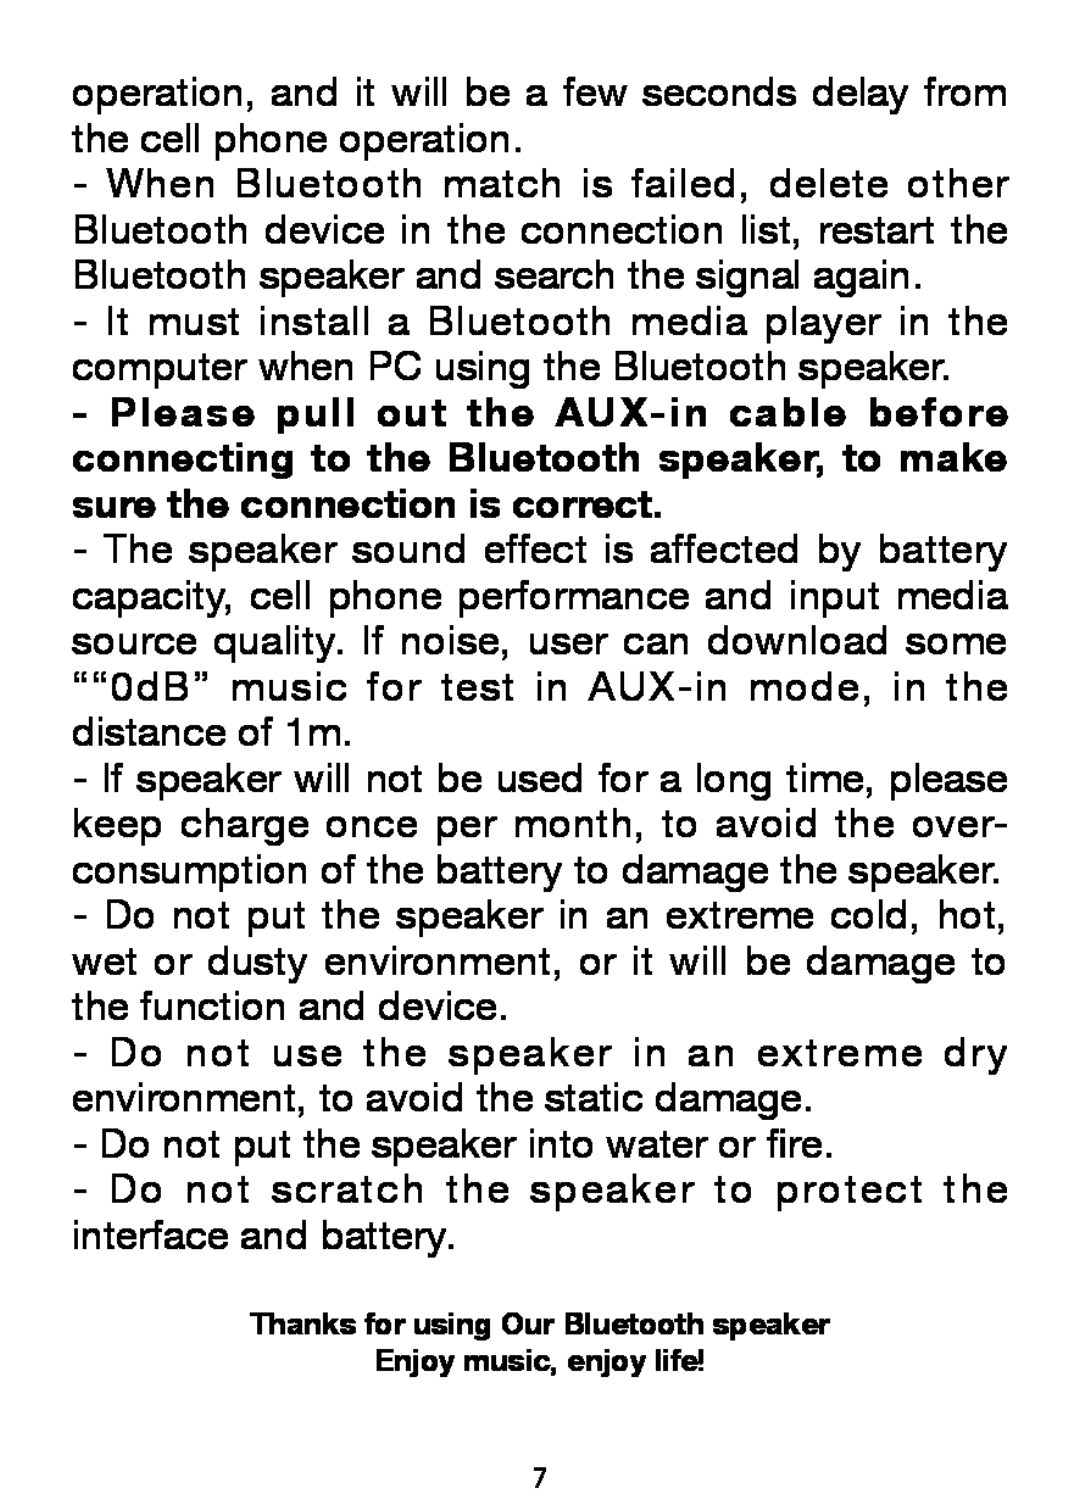 Sylvania SP269 manual Do not put the speaker into water or fire 